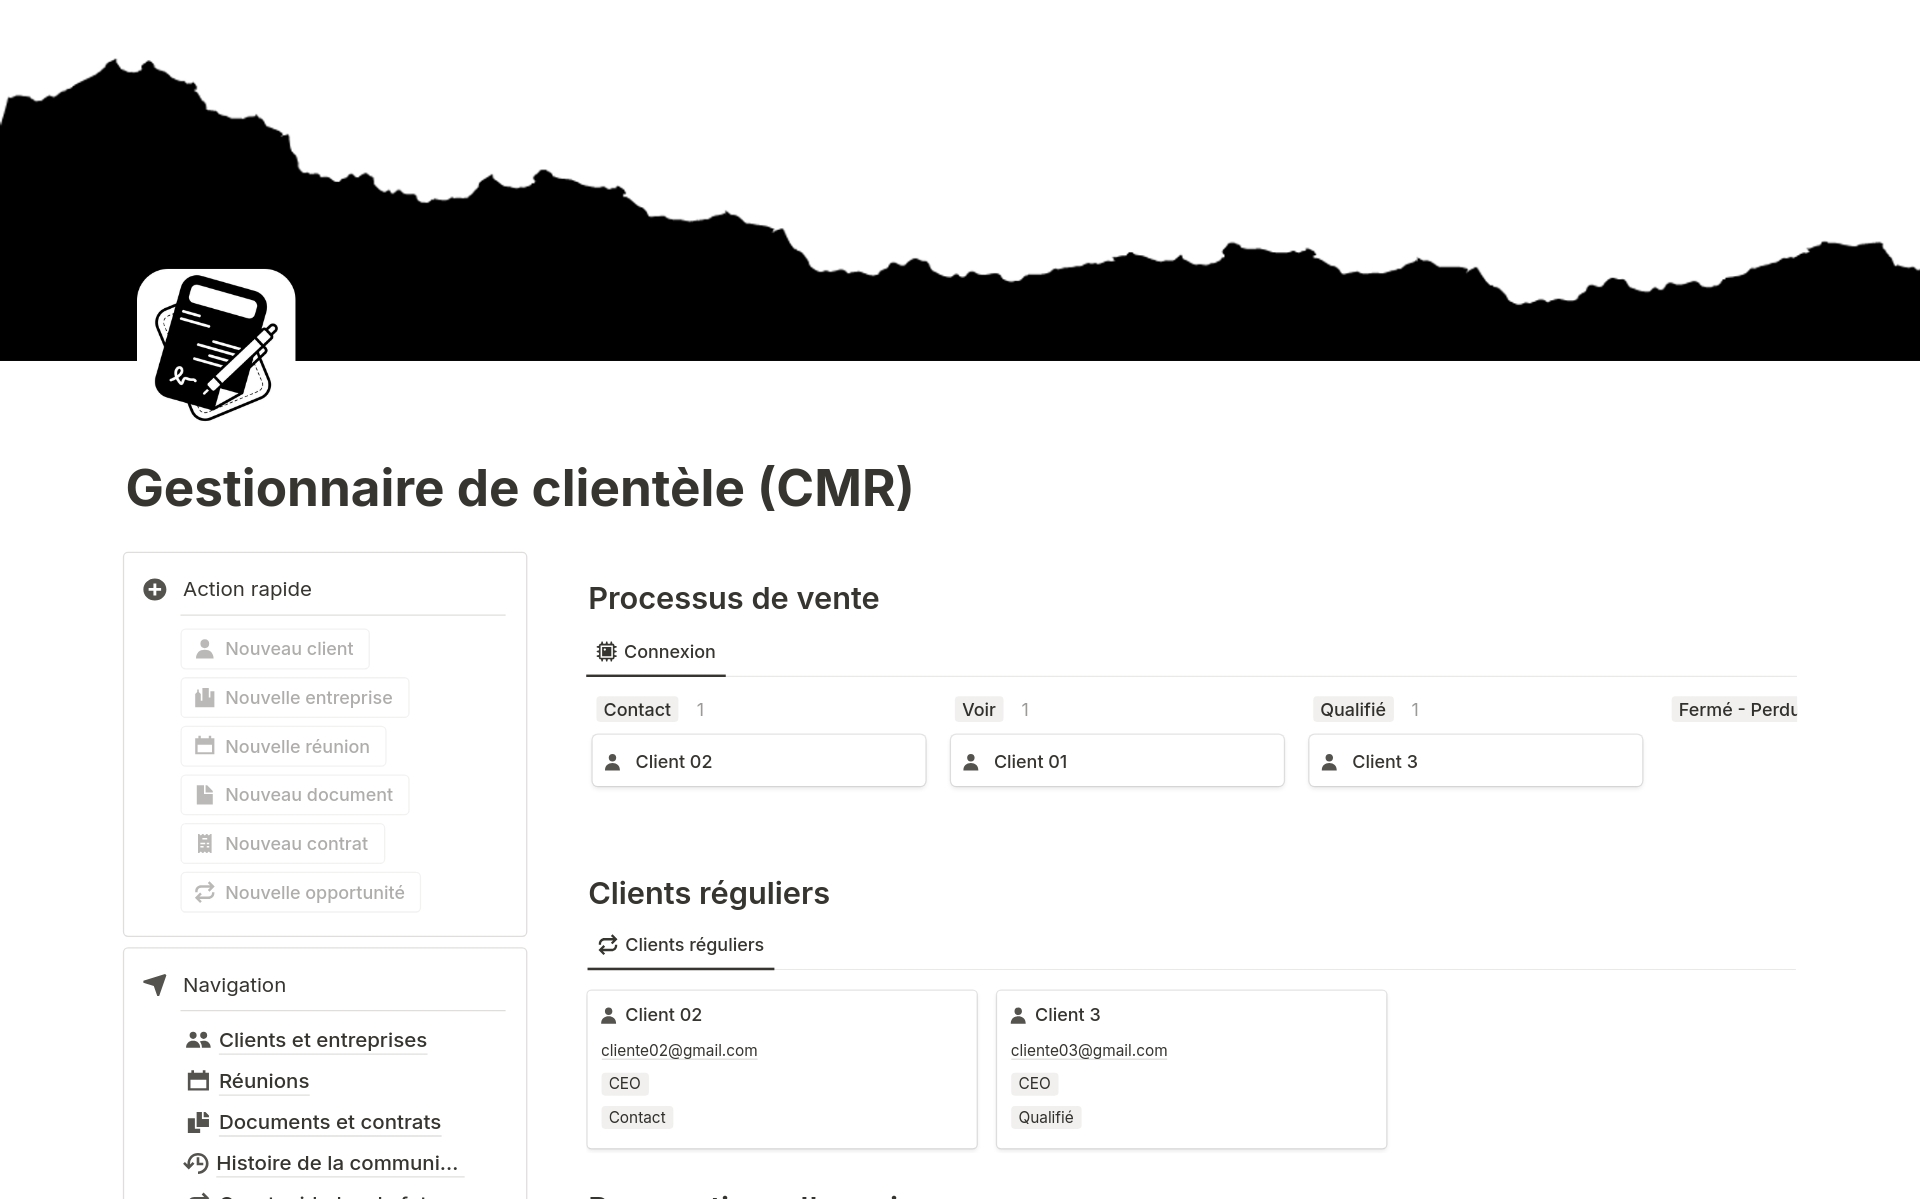 A template preview for Gestion des Relations Clients (CRM)